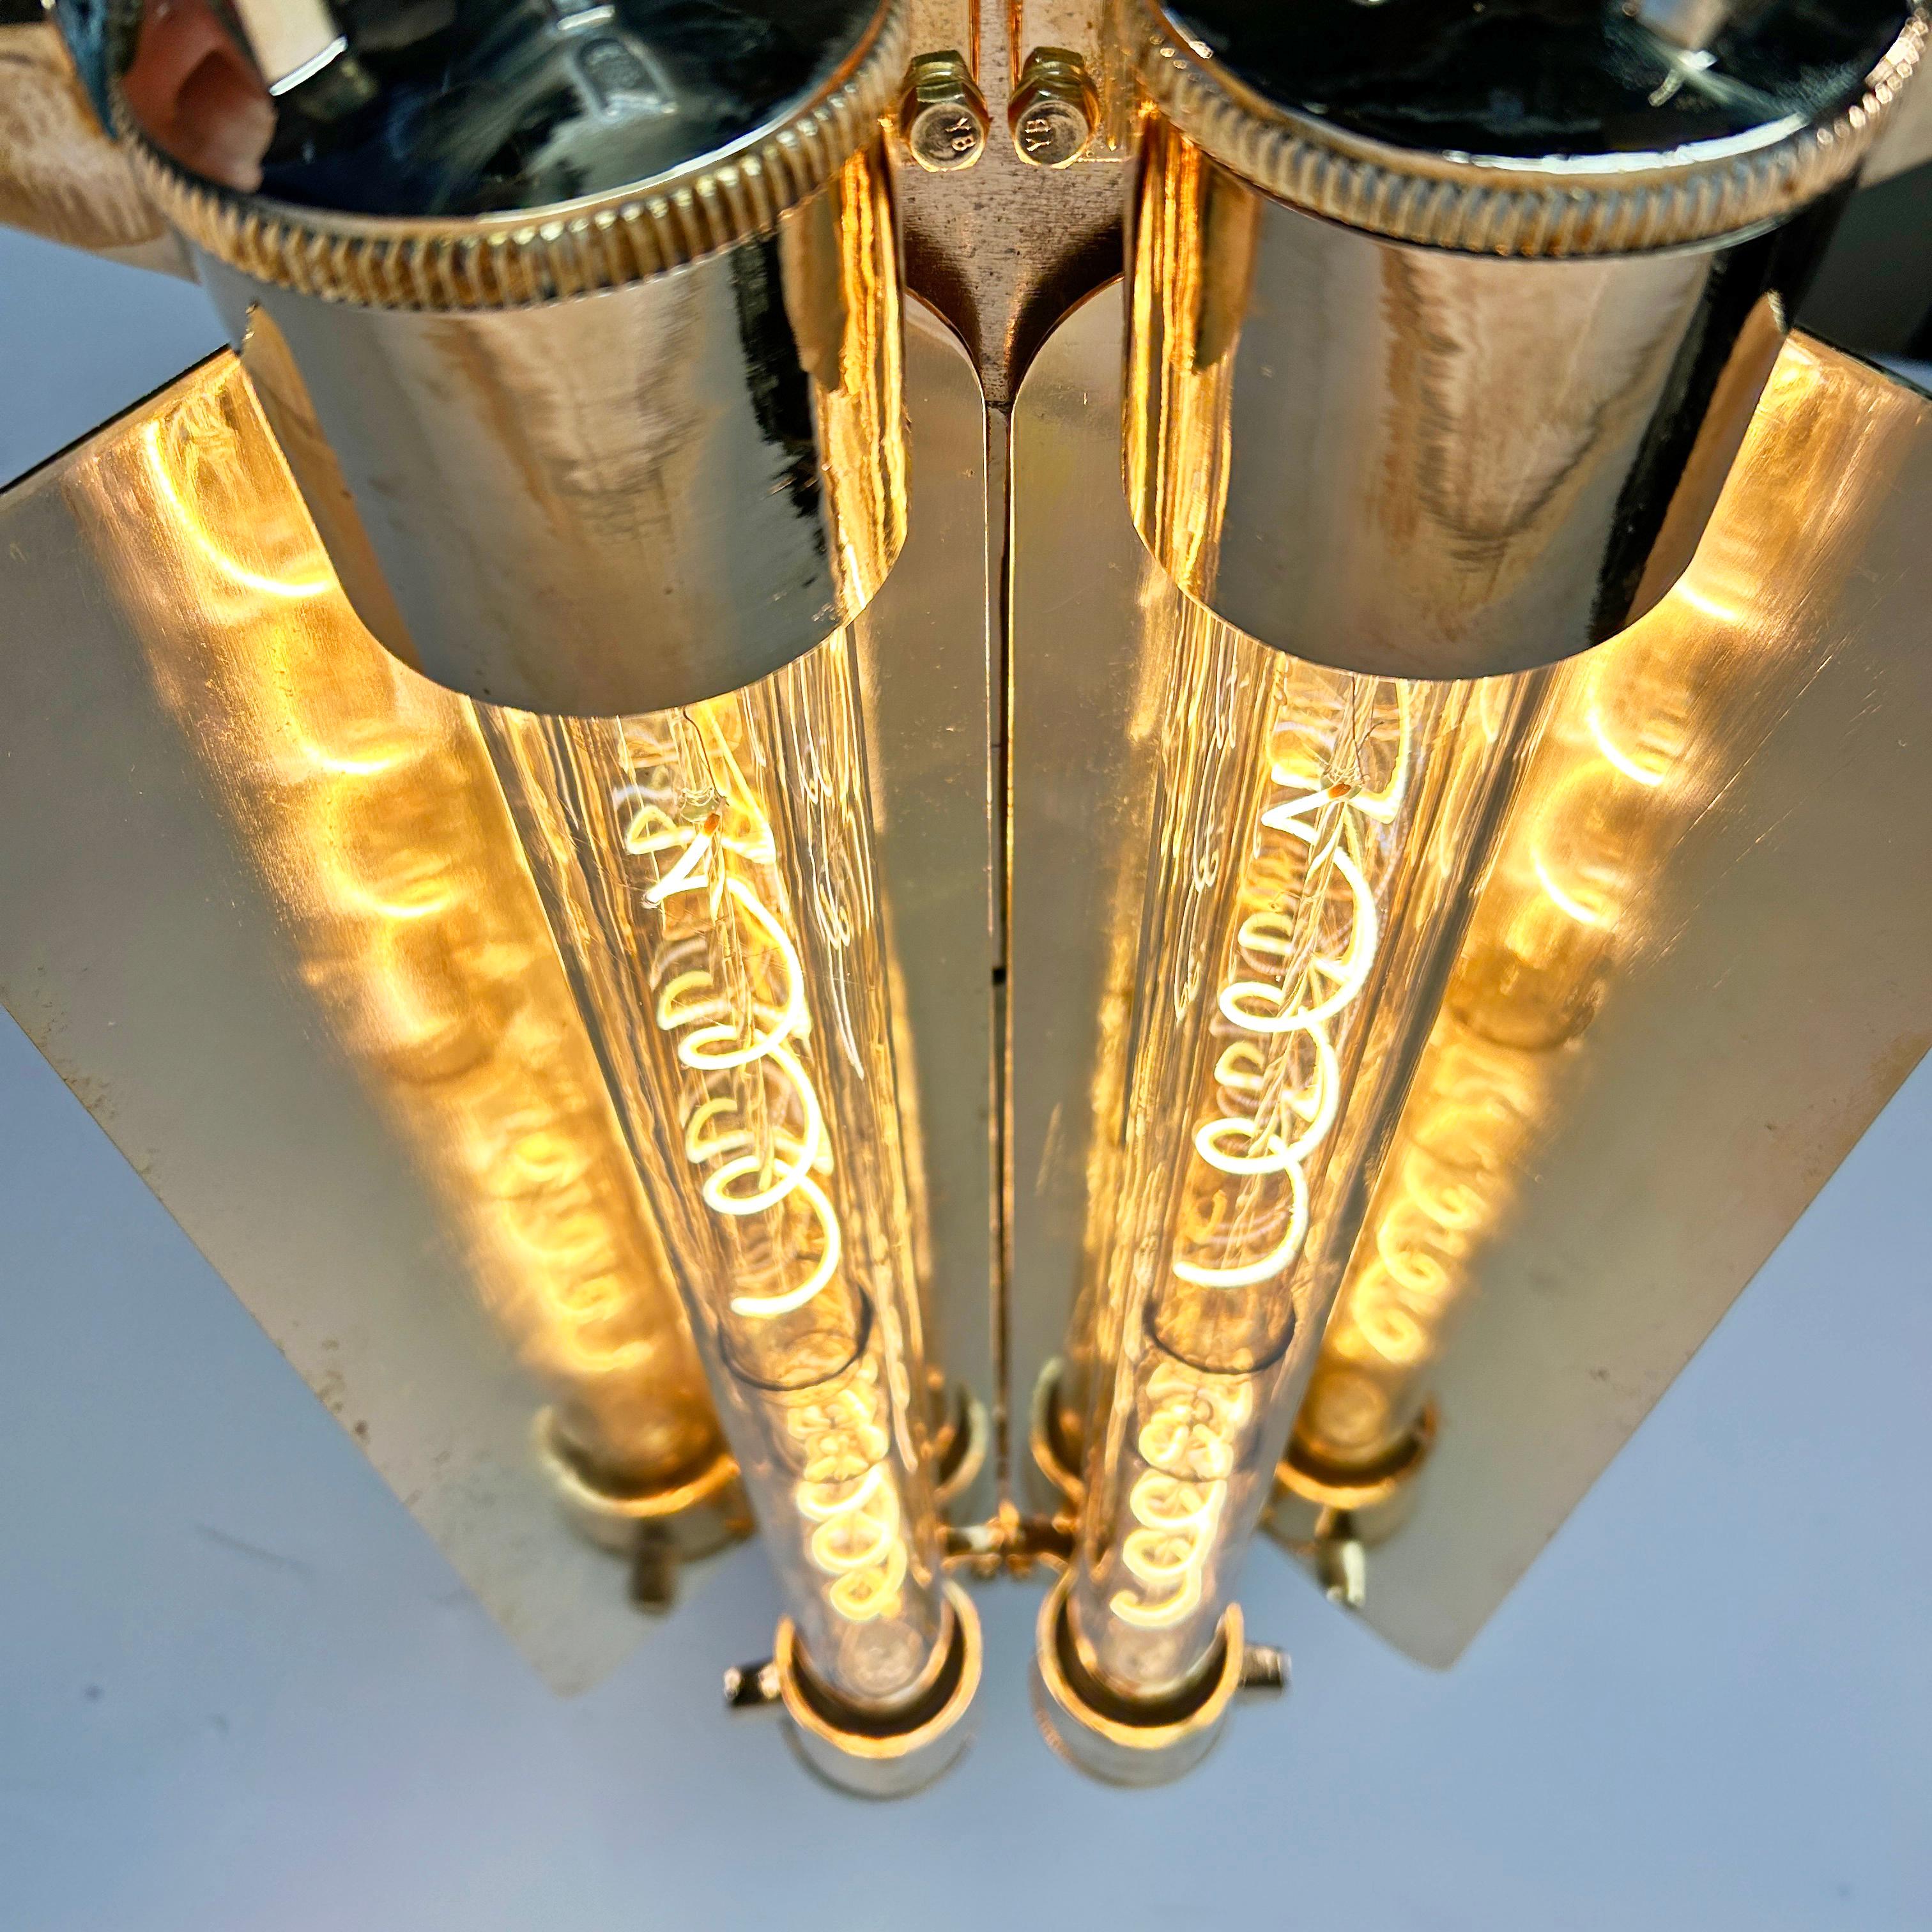 1970s Industrial Brass & Glass Flameproof Tube Light with Shades & Edison Lamps For Sale 11